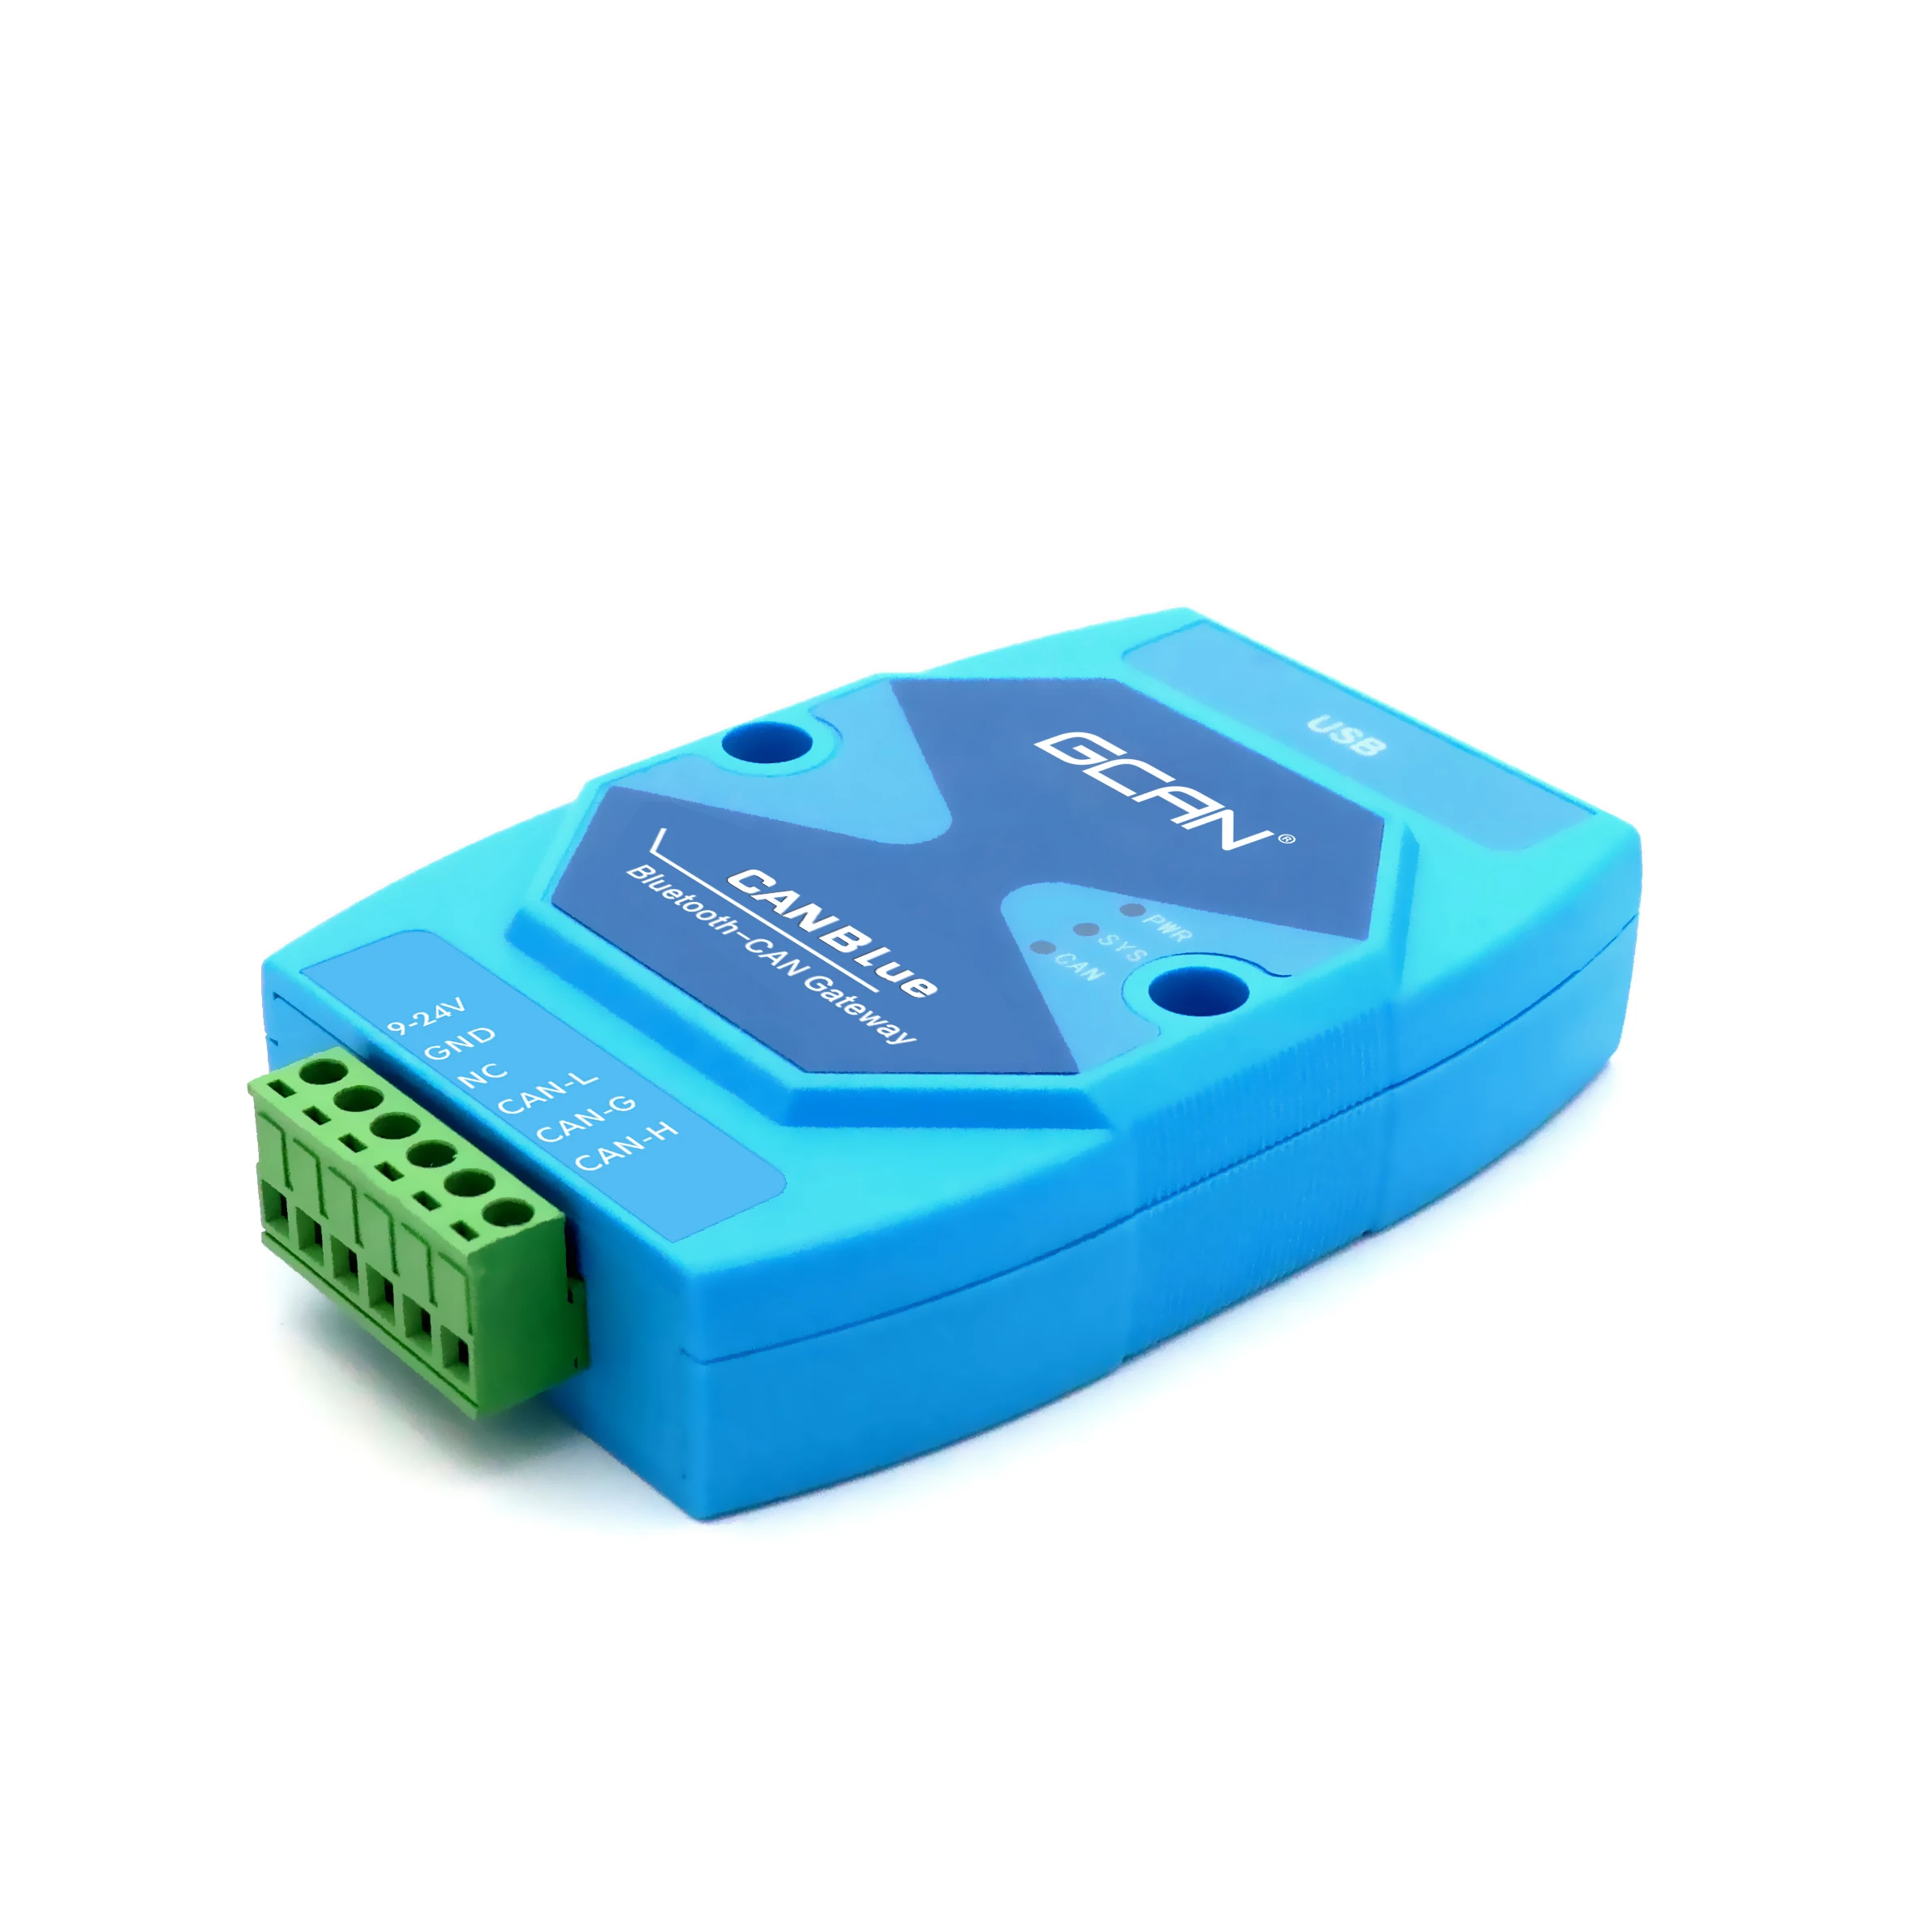 GCAN Canbus Gateway Bluetooth 2.0/5.0 To Can Converter Can Build Bidirectional Communication Between Mobile Device And Can Bus